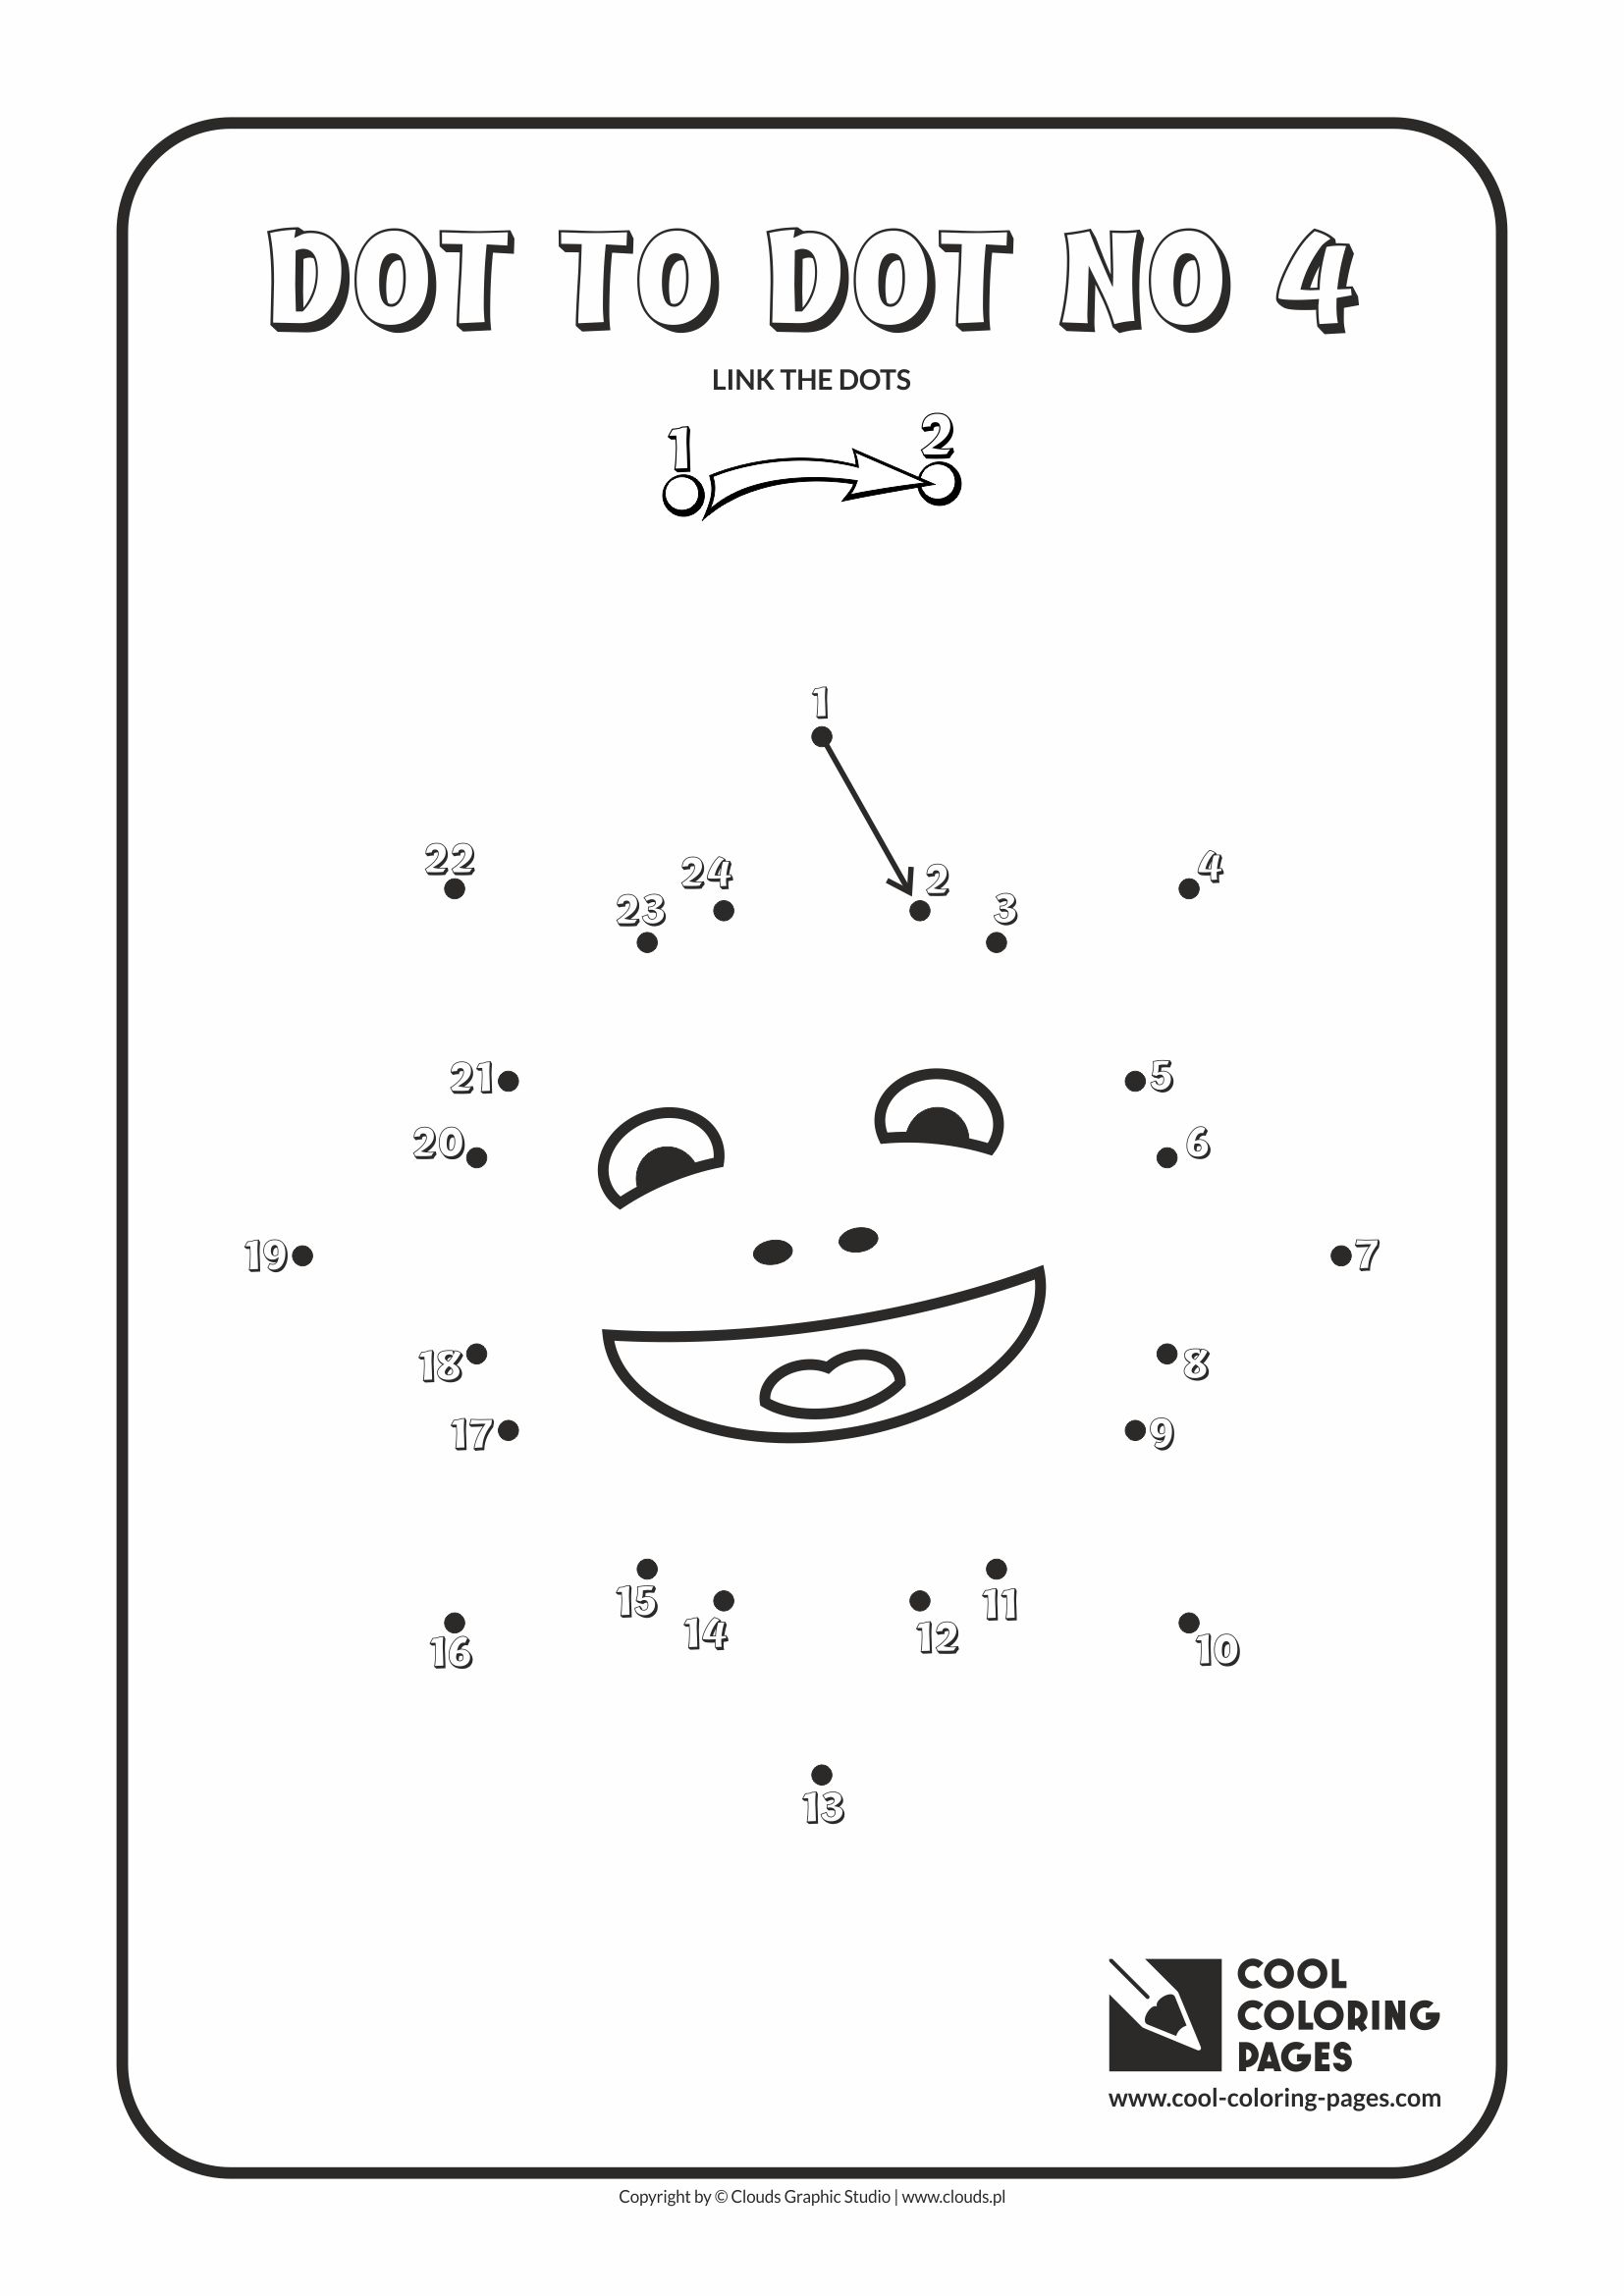 Cool Coloring Pages - Dot to dot / Dot to dot no 4